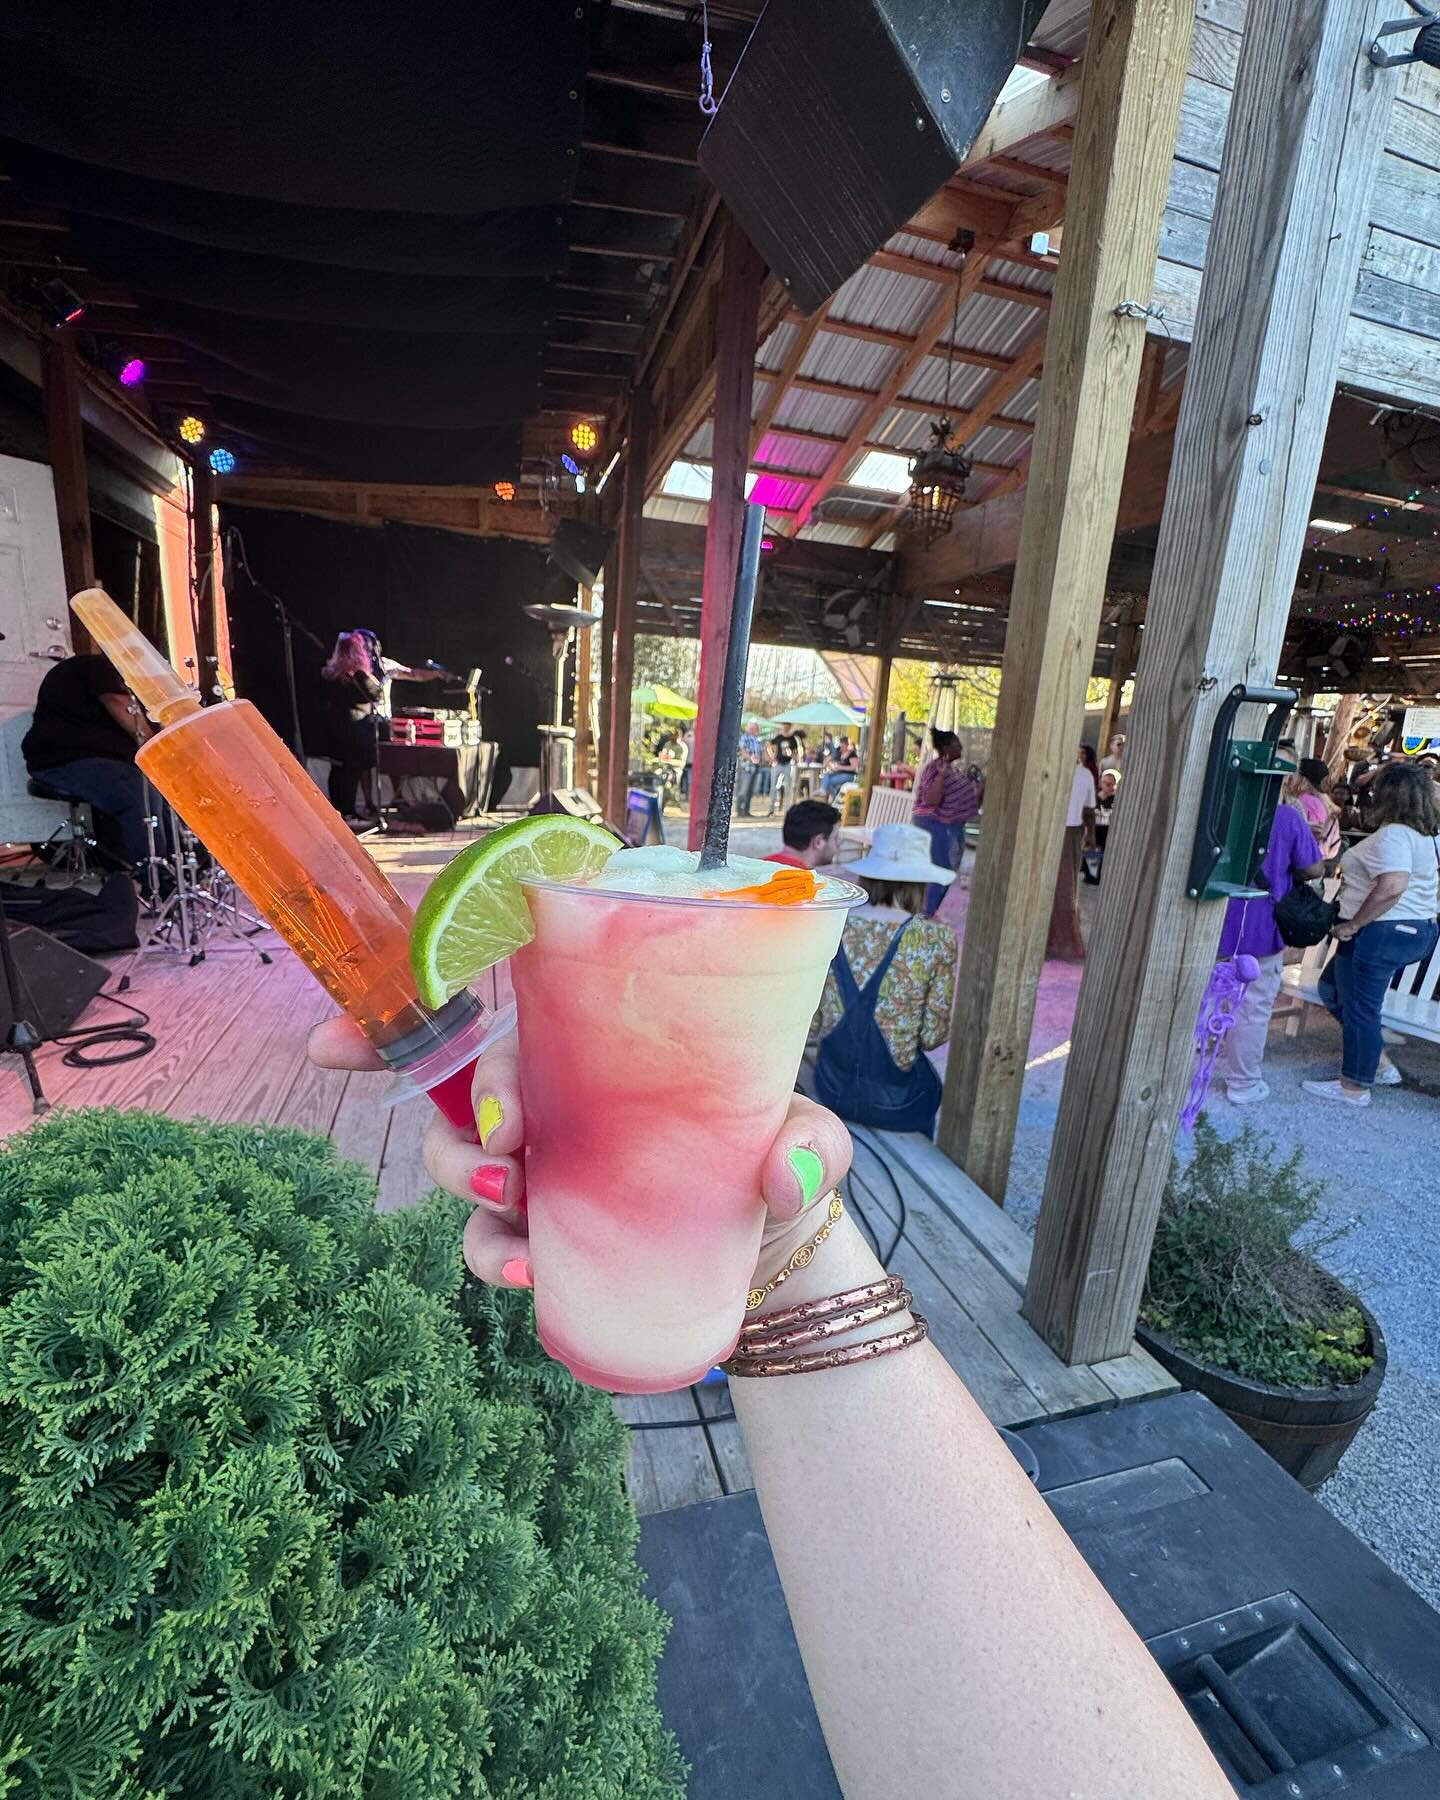 Happy Friday!!! Bar opens at NOON! The Camp&rsquo;s 256 happy hour runs from 4-7 PM 🍹🍻- $2 off signature cocktails, $5 wells and can beer, $6 High Noons and draft beer - 🍻🍹 

👇Here&rsquo;s what we&rsquo;ve got planned this weekend👇

🎶LIVE MUSI